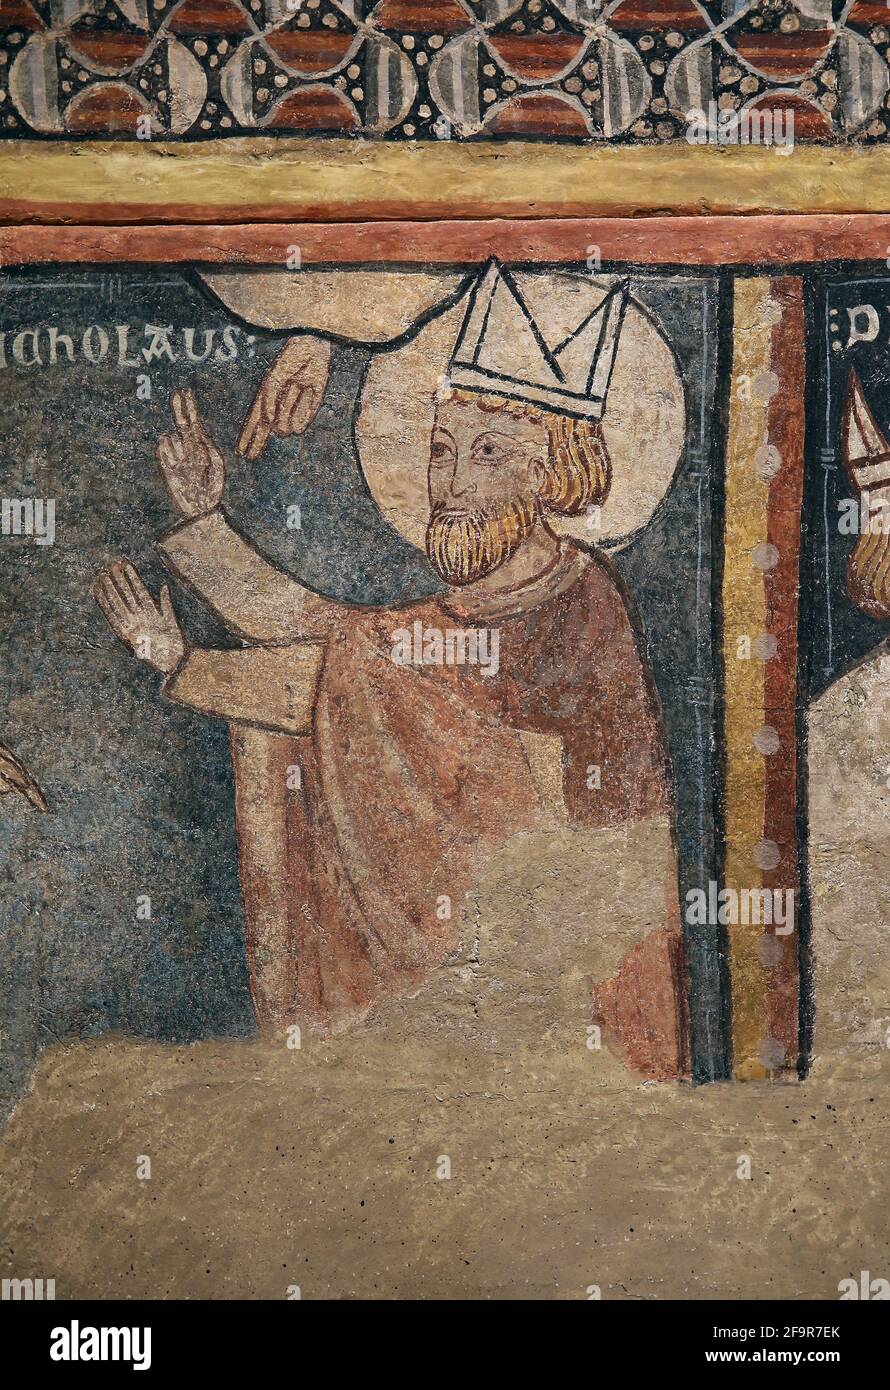 Life of St. Nicholas. Second Master of Bierge. Gothic.13th century. Church of St. Fructuosus in Bierge, Aragon Spain. National Art Museum of Catalonia. Stock Photo